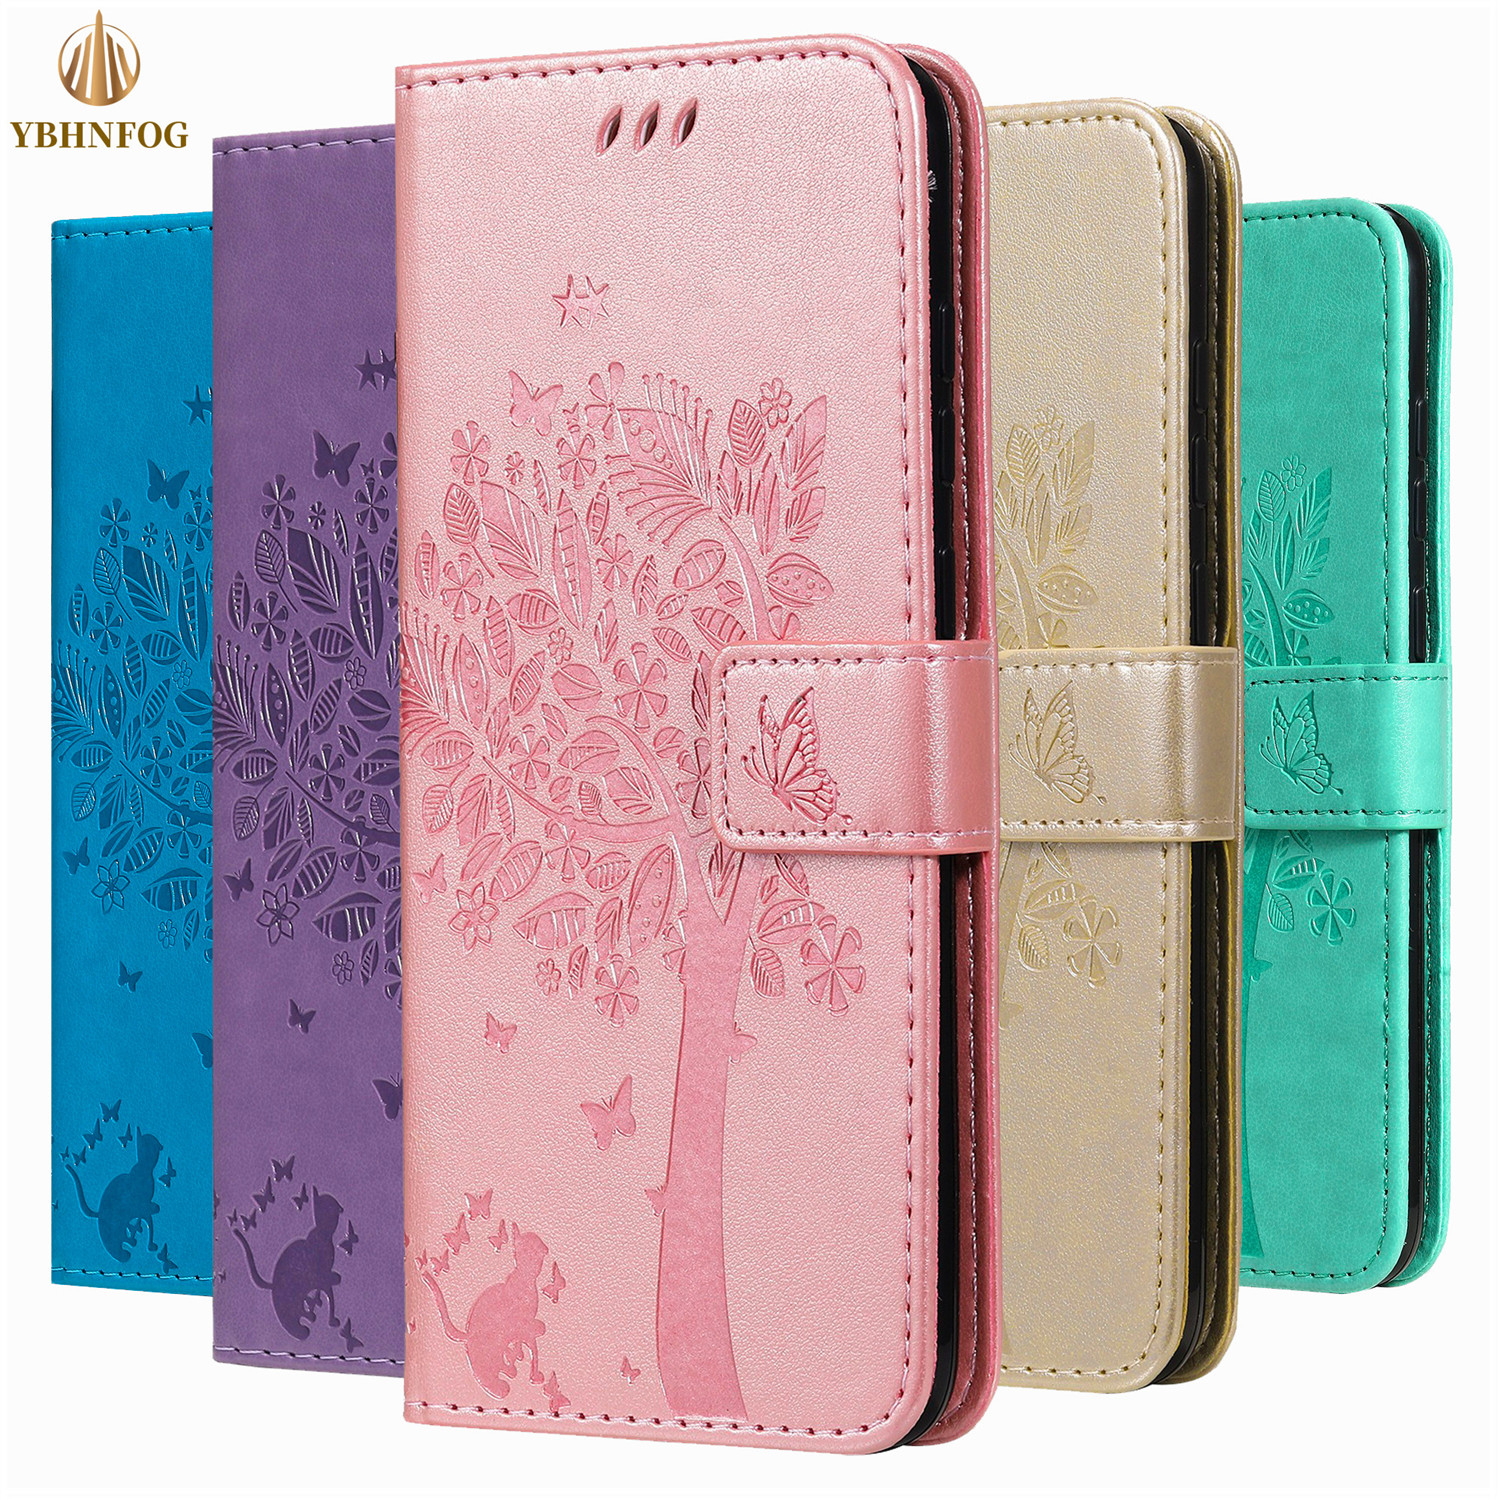 A10 A20E A30 A40 A50 A01 A21 A41 A51 A71 Embossed Leather Wallet Case For Samaung Galaxy A81 A91 Card Slots Flip Cover Stand Bag